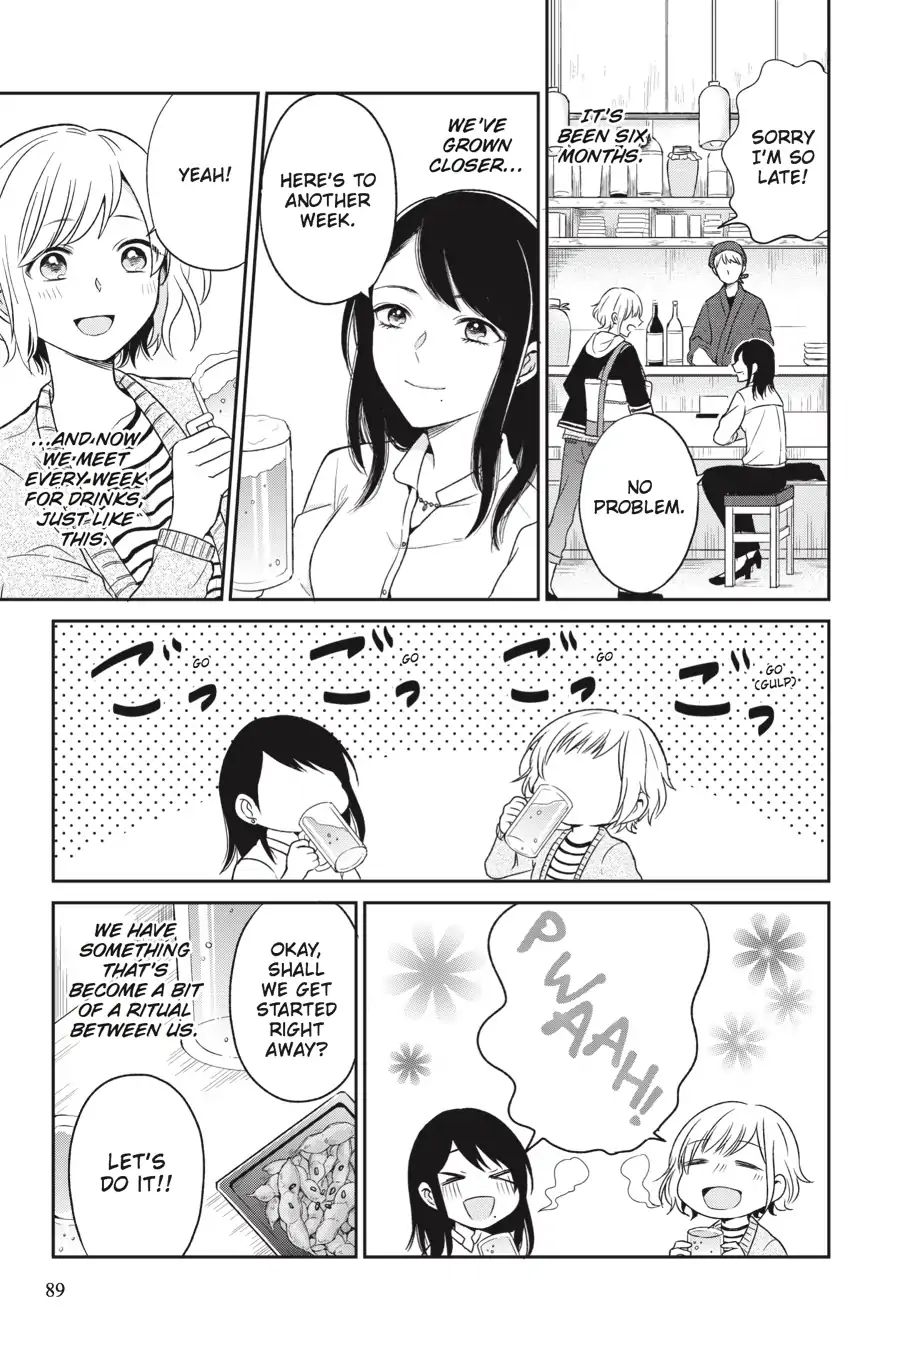 Every Time We Meet Eye To Eye, I Fall In Love With Her Vol.1 Chapter: Saya Fuyume - You Did Well - Picture 3